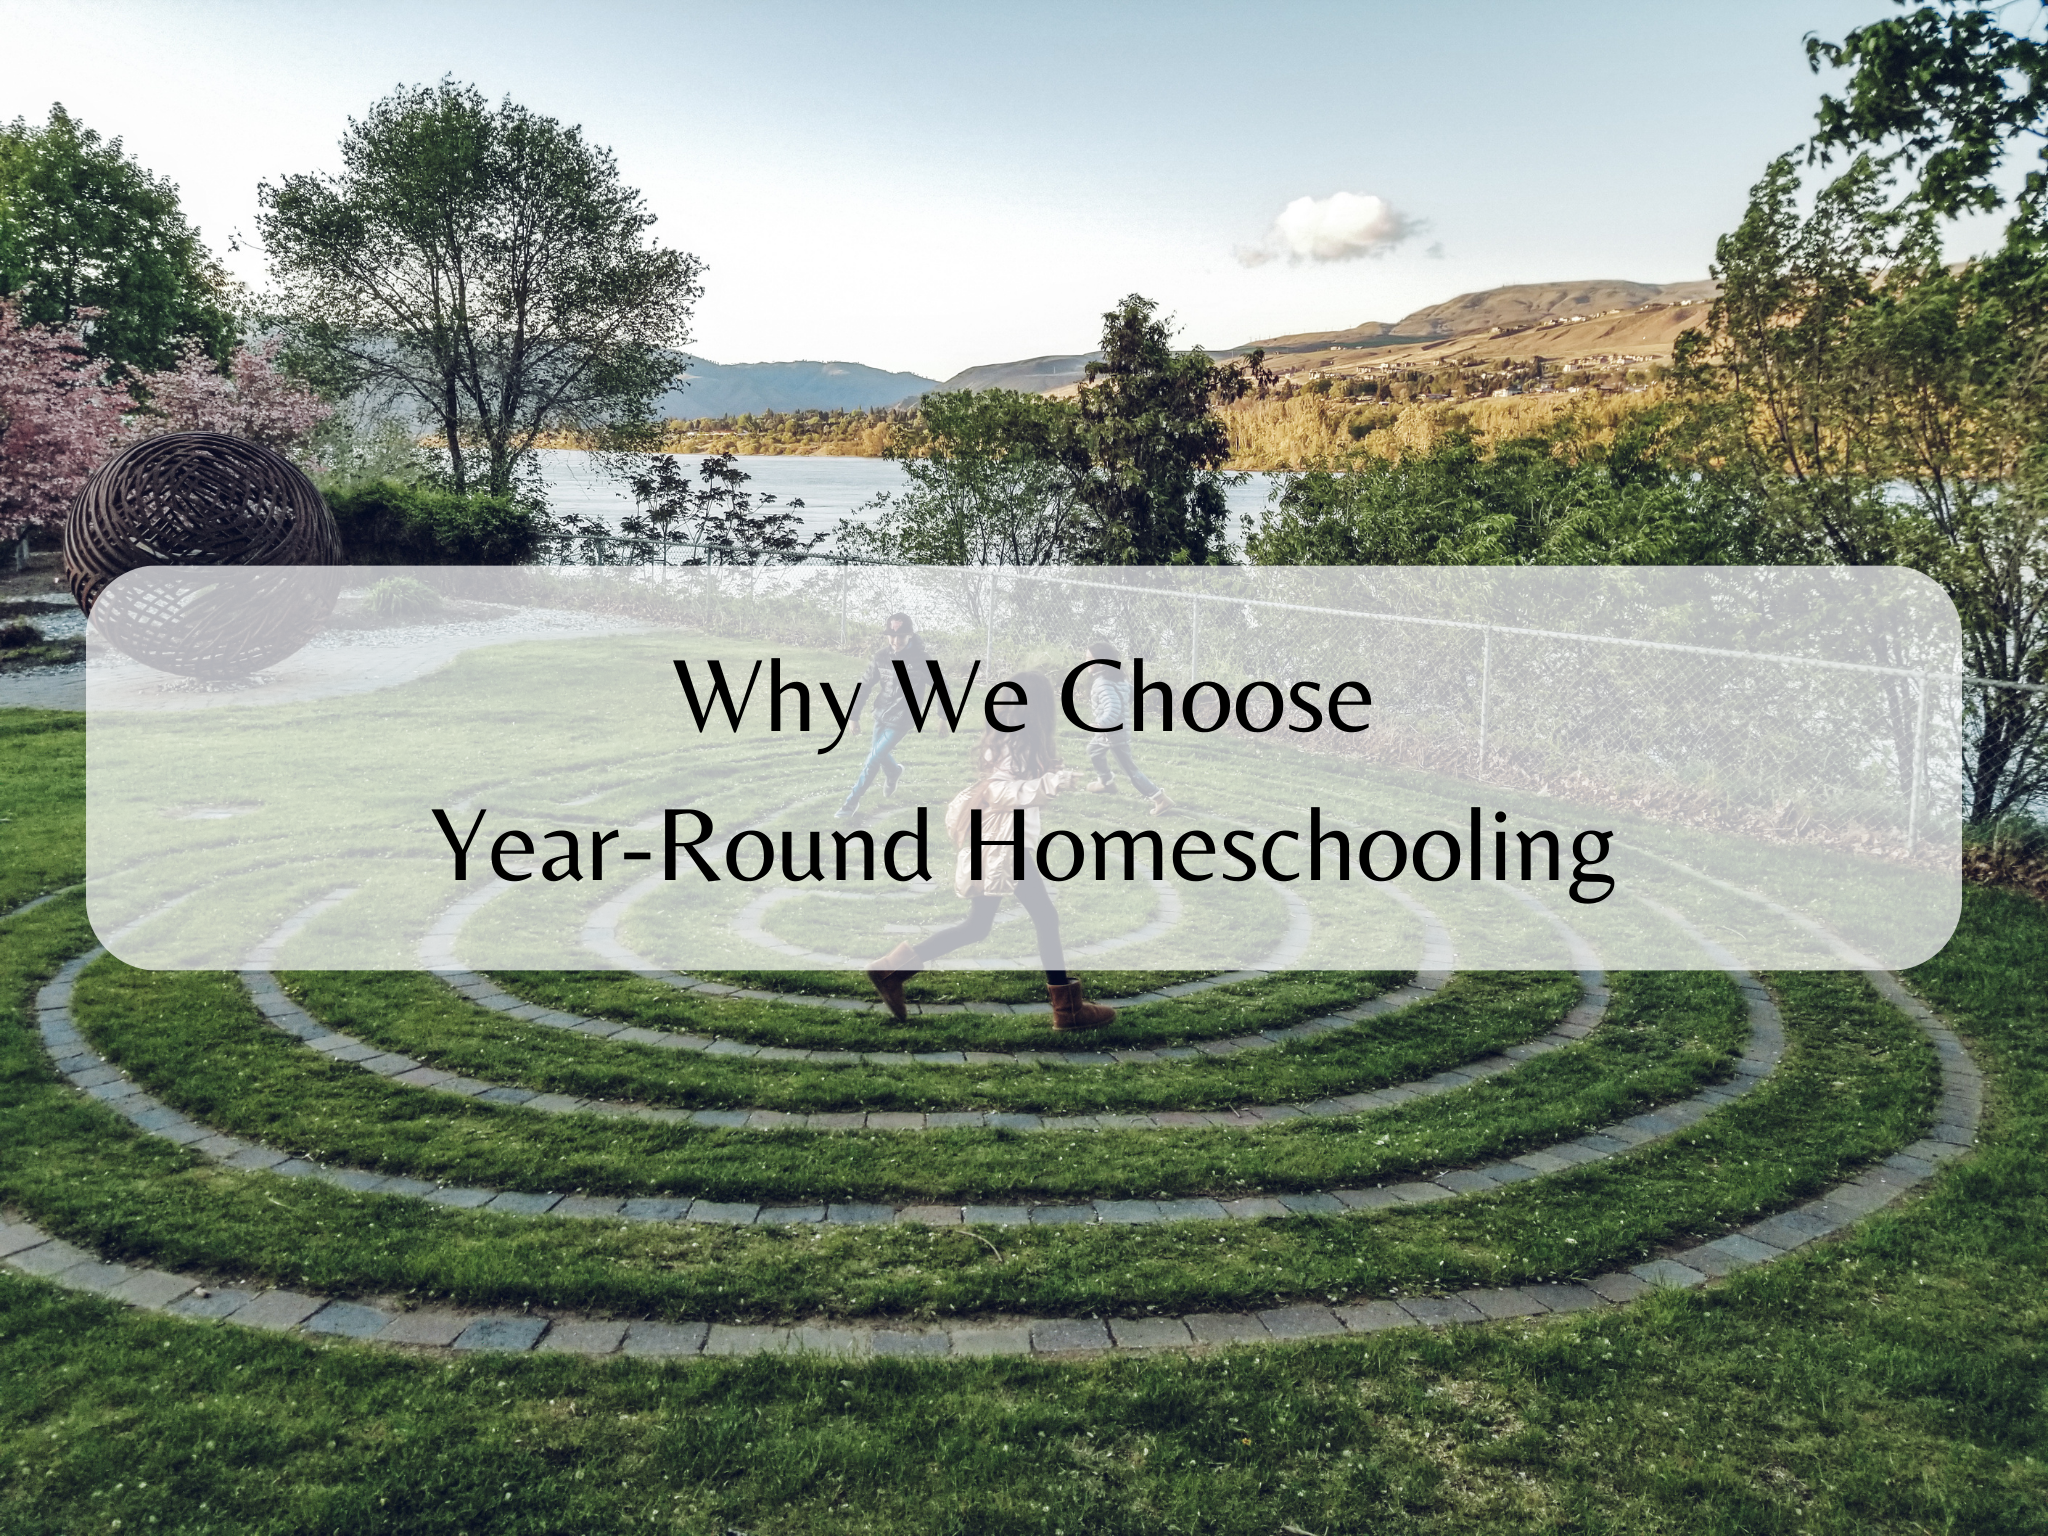 Why We Choose Year-Round Homeschooling